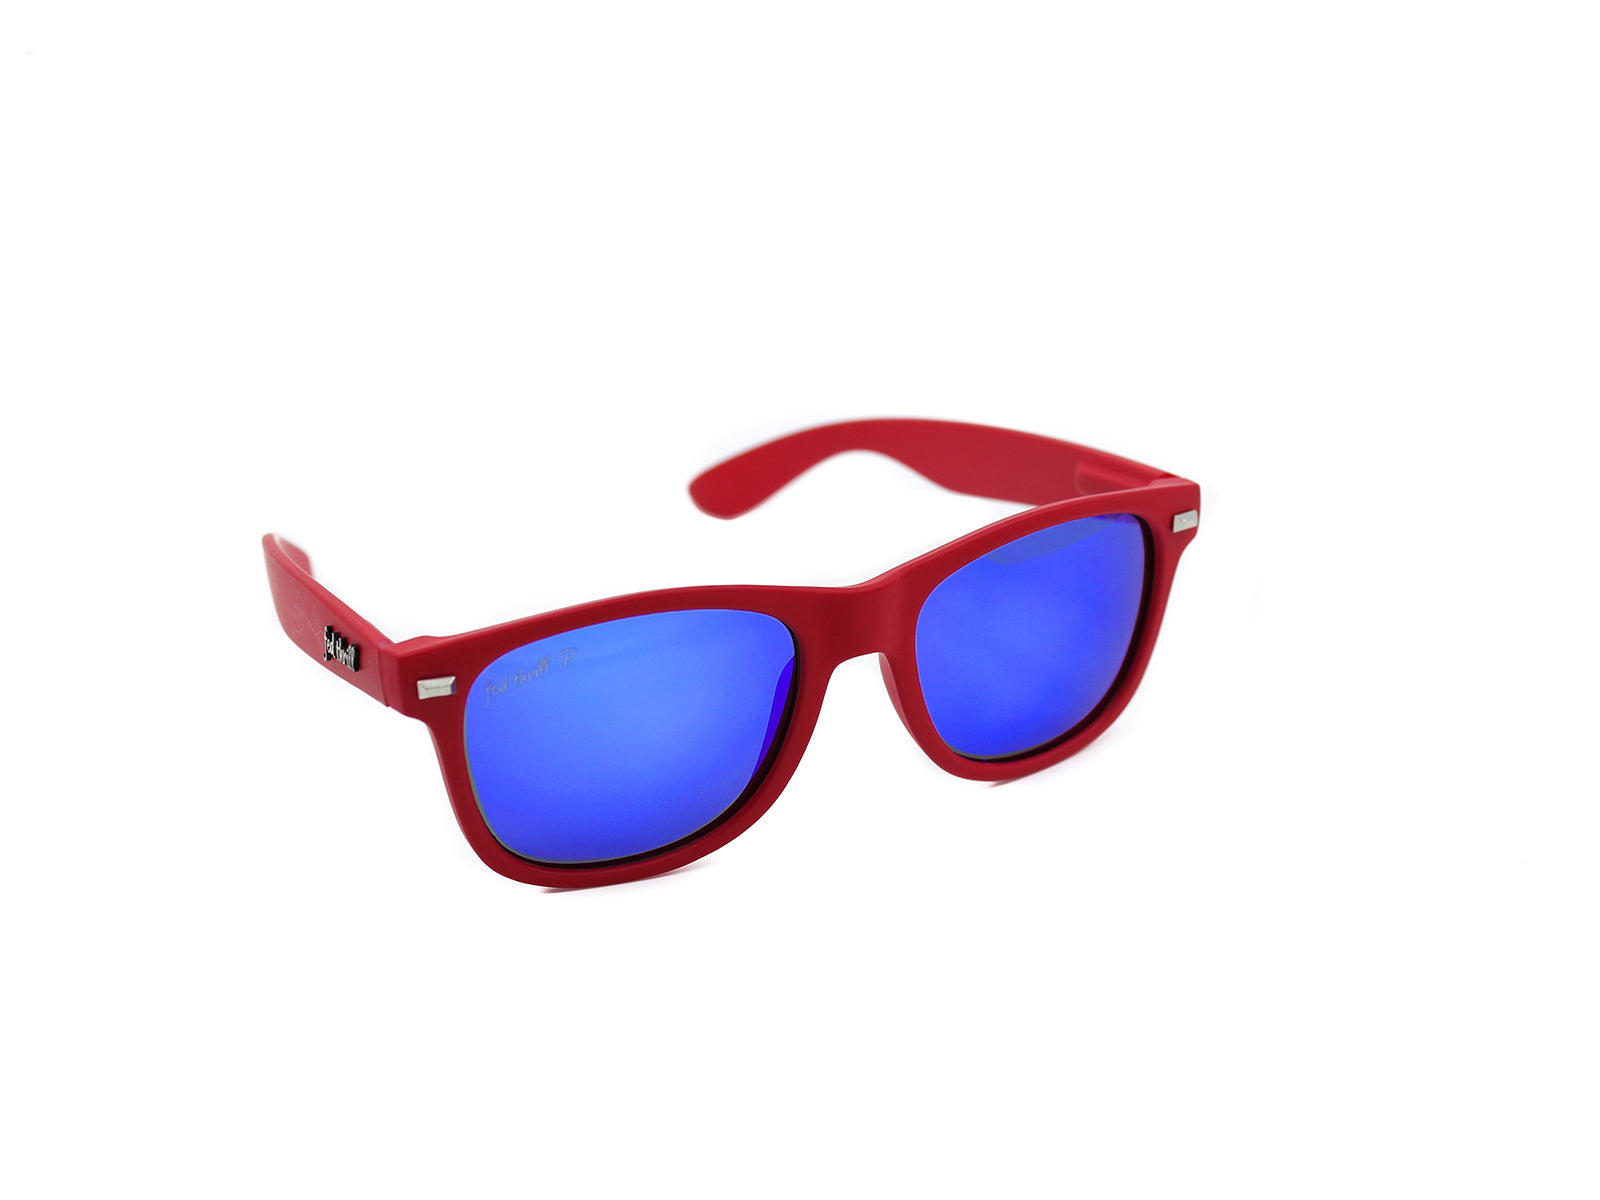 Fultons - Calverts: Red / Mirrored Blue Polarized